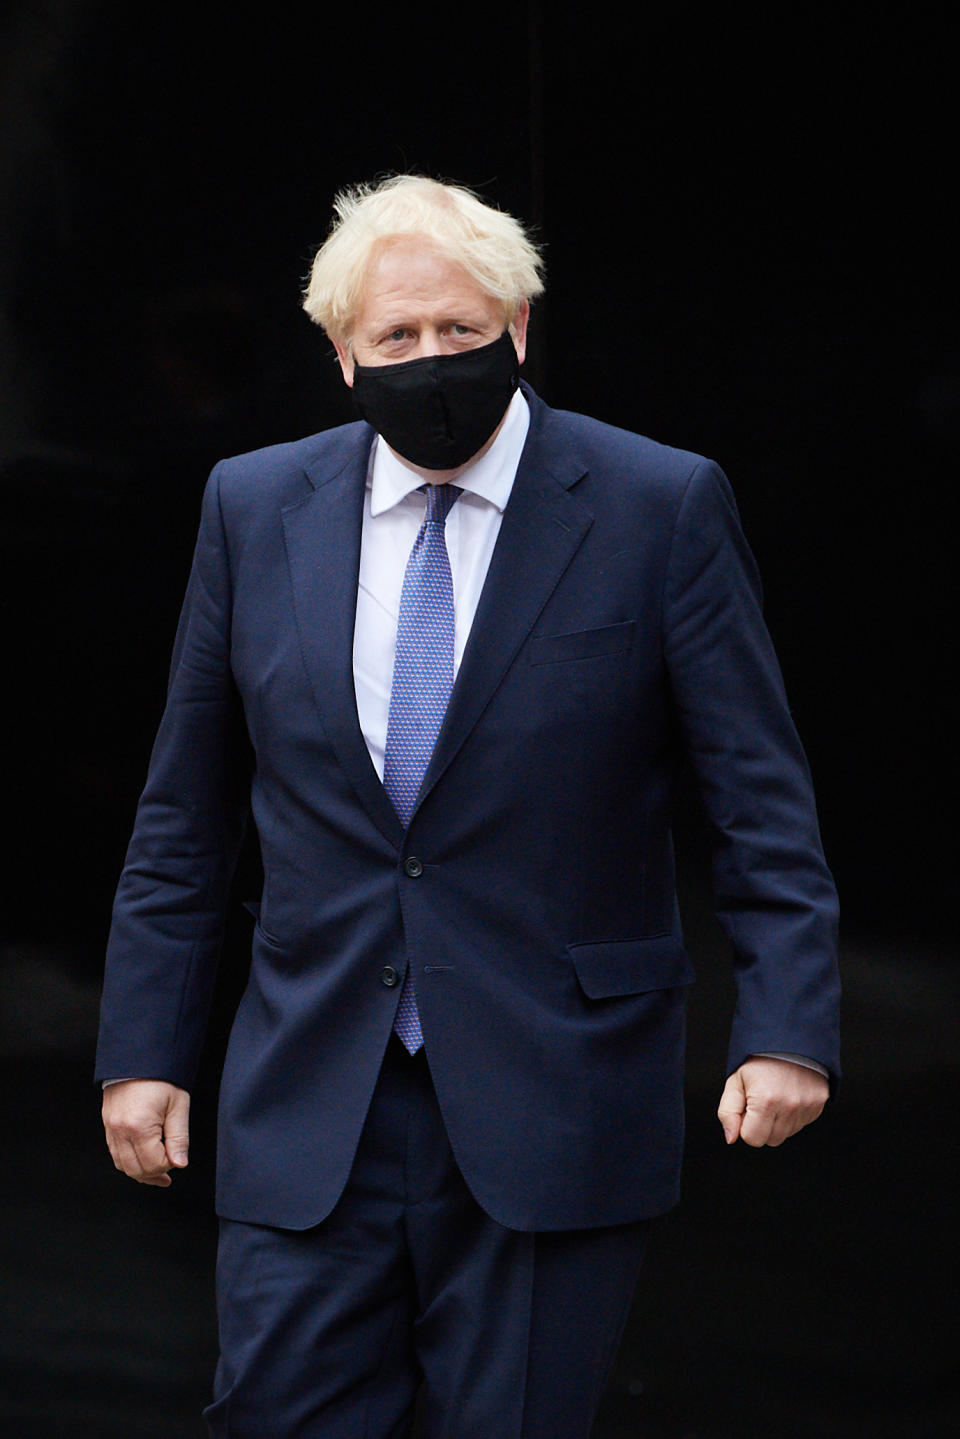 Prime Minister Boris Johnson during a visit to the headquarters of Octopus Energy in London.